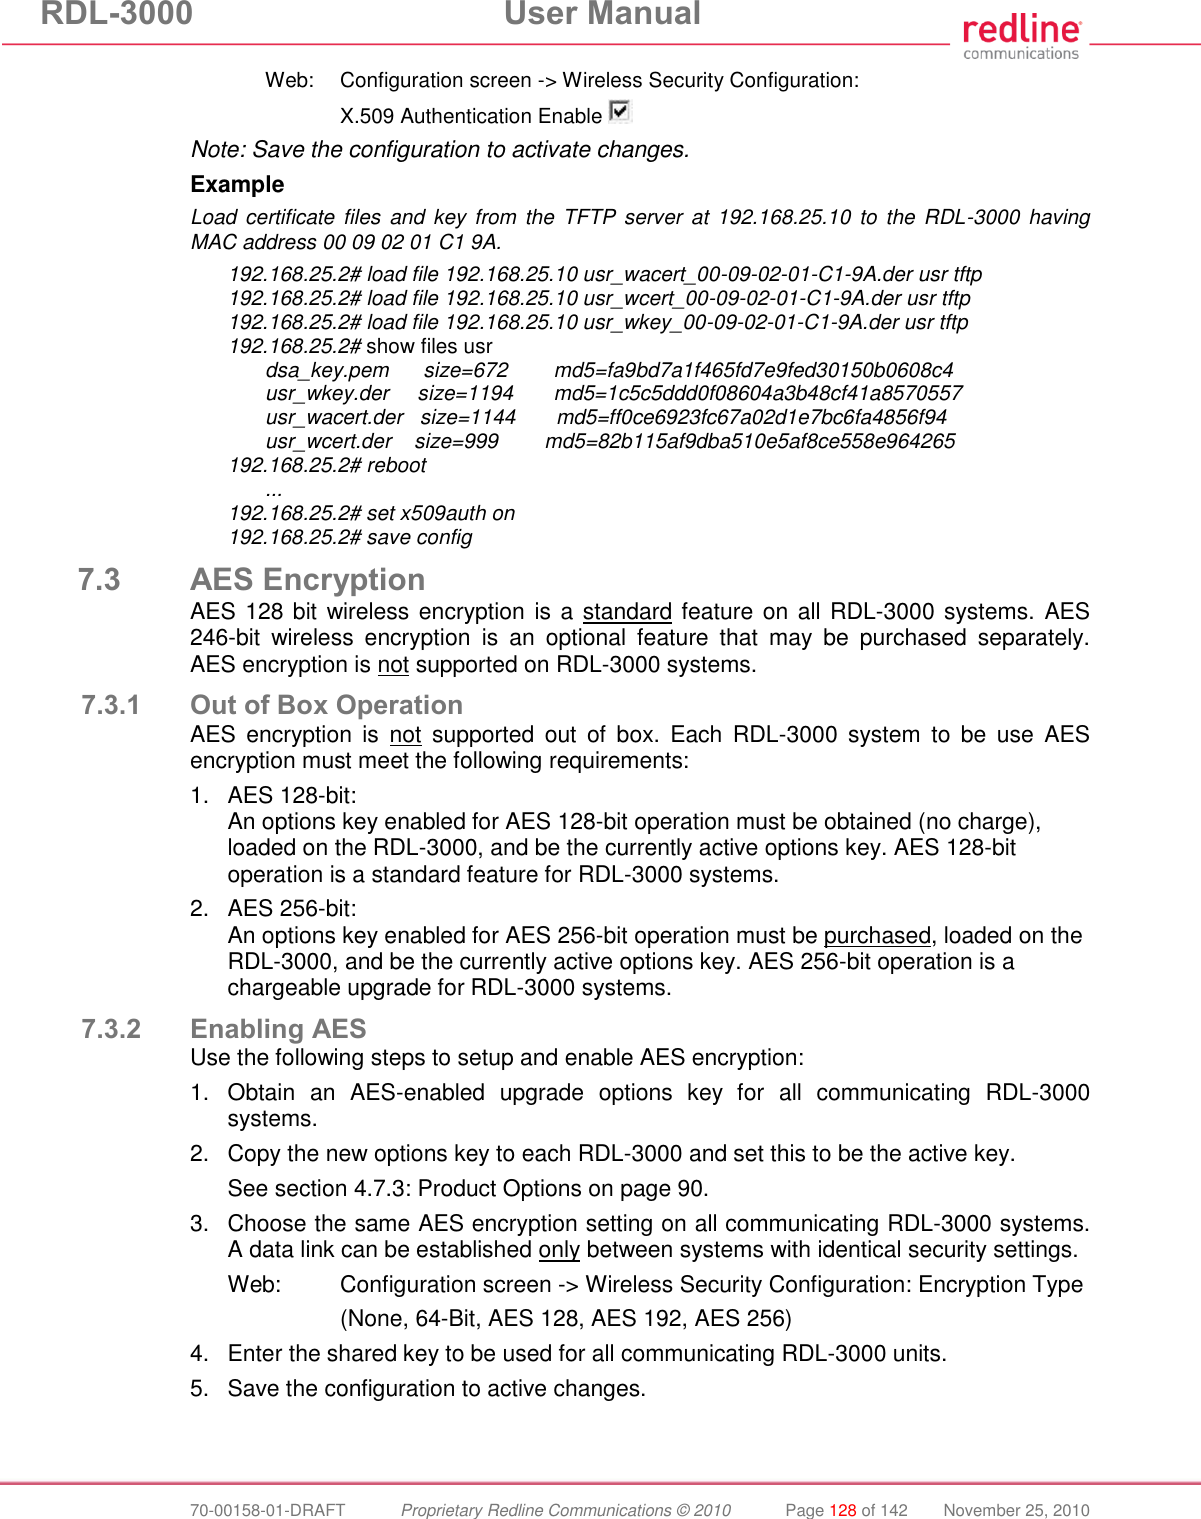 RDL-3000  User Manual  70-00158-01-DRAFT  Proprietary Redline Communications © 2010  Page 128 of 142  November 25, 2010   Web:  Configuration screen -&gt; Wireless Security Configuration:     X.509 Authentication Enable  Note: Save the configuration to activate changes. Example Load  certificate  files  and  key  from  the  TFTP  server  at 192.168.25.10  to  the  RDL-3000  having MAC address 00 09 02 01 C1 9A. 192.168.25.2# load file 192.168.25.10 usr_wacert_00-09-02-01-C1-9A.der usr tftp 192.168.25.2# load file 192.168.25.10 usr_wcert_00-09-02-01-C1-9A.der usr tftp 192.168.25.2# load file 192.168.25.10 usr_wkey_00-09-02-01-C1-9A.der usr tftp 192.168.25.2# show files usr   dsa_key.pem      size=672        md5=fa9bd7a1f465fd7e9fed30150b0608c4   usr_wkey.der     size=1194       md5=1c5c5ddd0f08604a3b48cf41a8570557   usr_wacert.der   size=1144       md5=ff0ce6923fc67a02d1e7bc6fa4856f94   usr_wcert.der    size=999        md5=82b115af9dba510e5af8ce558e964265 192.168.25.2# reboot  ... 192.168.25.2# set x509auth on 192.168.25.2# save config 7.3 AES Encryption AES 128 bit  wireless encryption is a standard feature on all RDL-3000 systems. AES 246-bit  wireless  encryption  is  an  optional  feature  that  may  be  purchased  separately. AES encryption is not supported on RDL-3000 systems. 7.3.1 Out of Box Operation AES  encryption  is  not  supported  out  of  box.  Each  RDL-3000  system  to  be  use  AES encryption must meet the following requirements: 1.  AES 128-bit: An options key enabled for AES 128-bit operation must be obtained (no charge), loaded on the RDL-3000, and be the currently active options key. AES 128-bit operation is a standard feature for RDL-3000 systems. 2.  AES 256-bit: An options key enabled for AES 256-bit operation must be purchased, loaded on the RDL-3000, and be the currently active options key. AES 256-bit operation is a chargeable upgrade for RDL-3000 systems. 7.3.2 Enabling AES Use the following steps to setup and enable AES encryption: 1.  Obtain  an  AES-enabled  upgrade  options  key  for  all  communicating  RDL-3000 systems. 2.  Copy the new options key to each RDL-3000 and set this to be the active key. See section 4.7.3: Product Options on page 90. 3.  Choose the same AES encryption setting on all communicating RDL-3000 systems. A data link can be established only between systems with identical security settings. Web:  Configuration screen -&gt; Wireless Security Configuration: Encryption Type     (None, 64-Bit, AES 128, AES 192, AES 256) 4.  Enter the shared key to be used for all communicating RDL-3000 units. 5.  Save the configuration to active changes. 